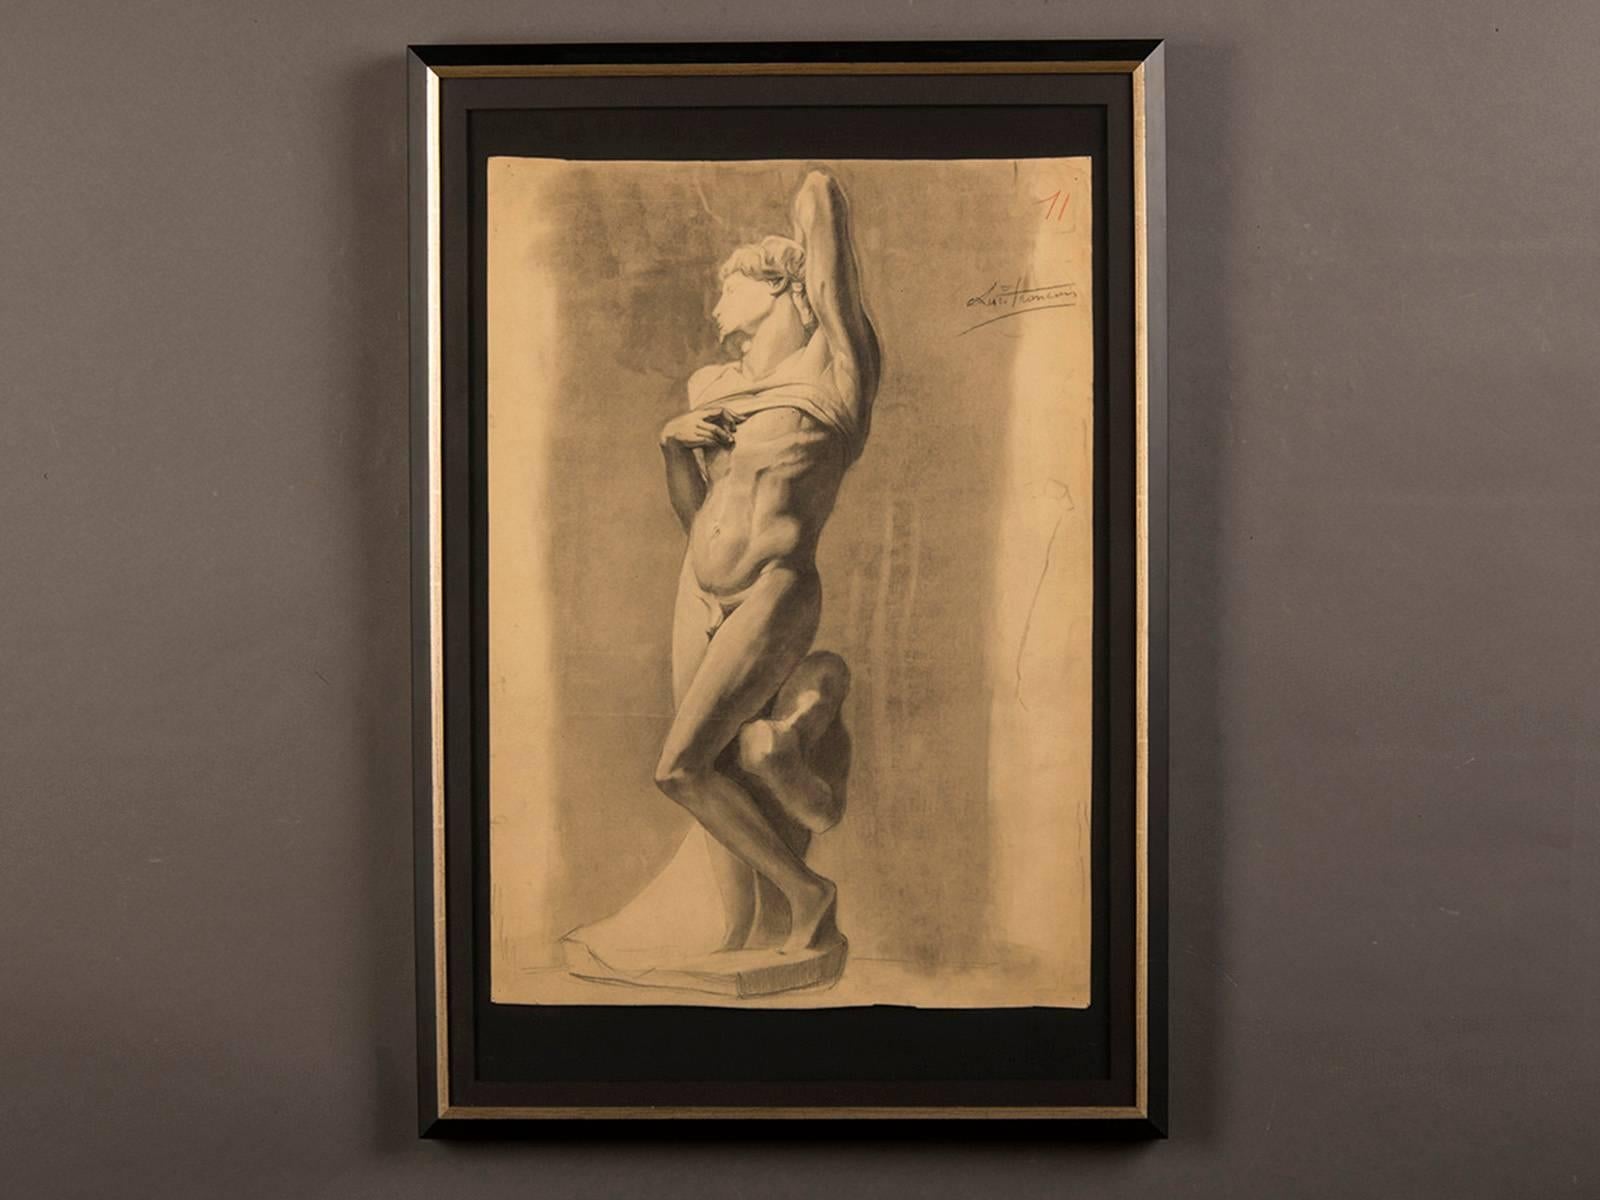 Be the first to see our new arrivals directly through 1stdibs! Please click follow dealer below.
 
19th century drawing from a Royal Academy class in France, circa 1880 featuring a man in a classical pose.